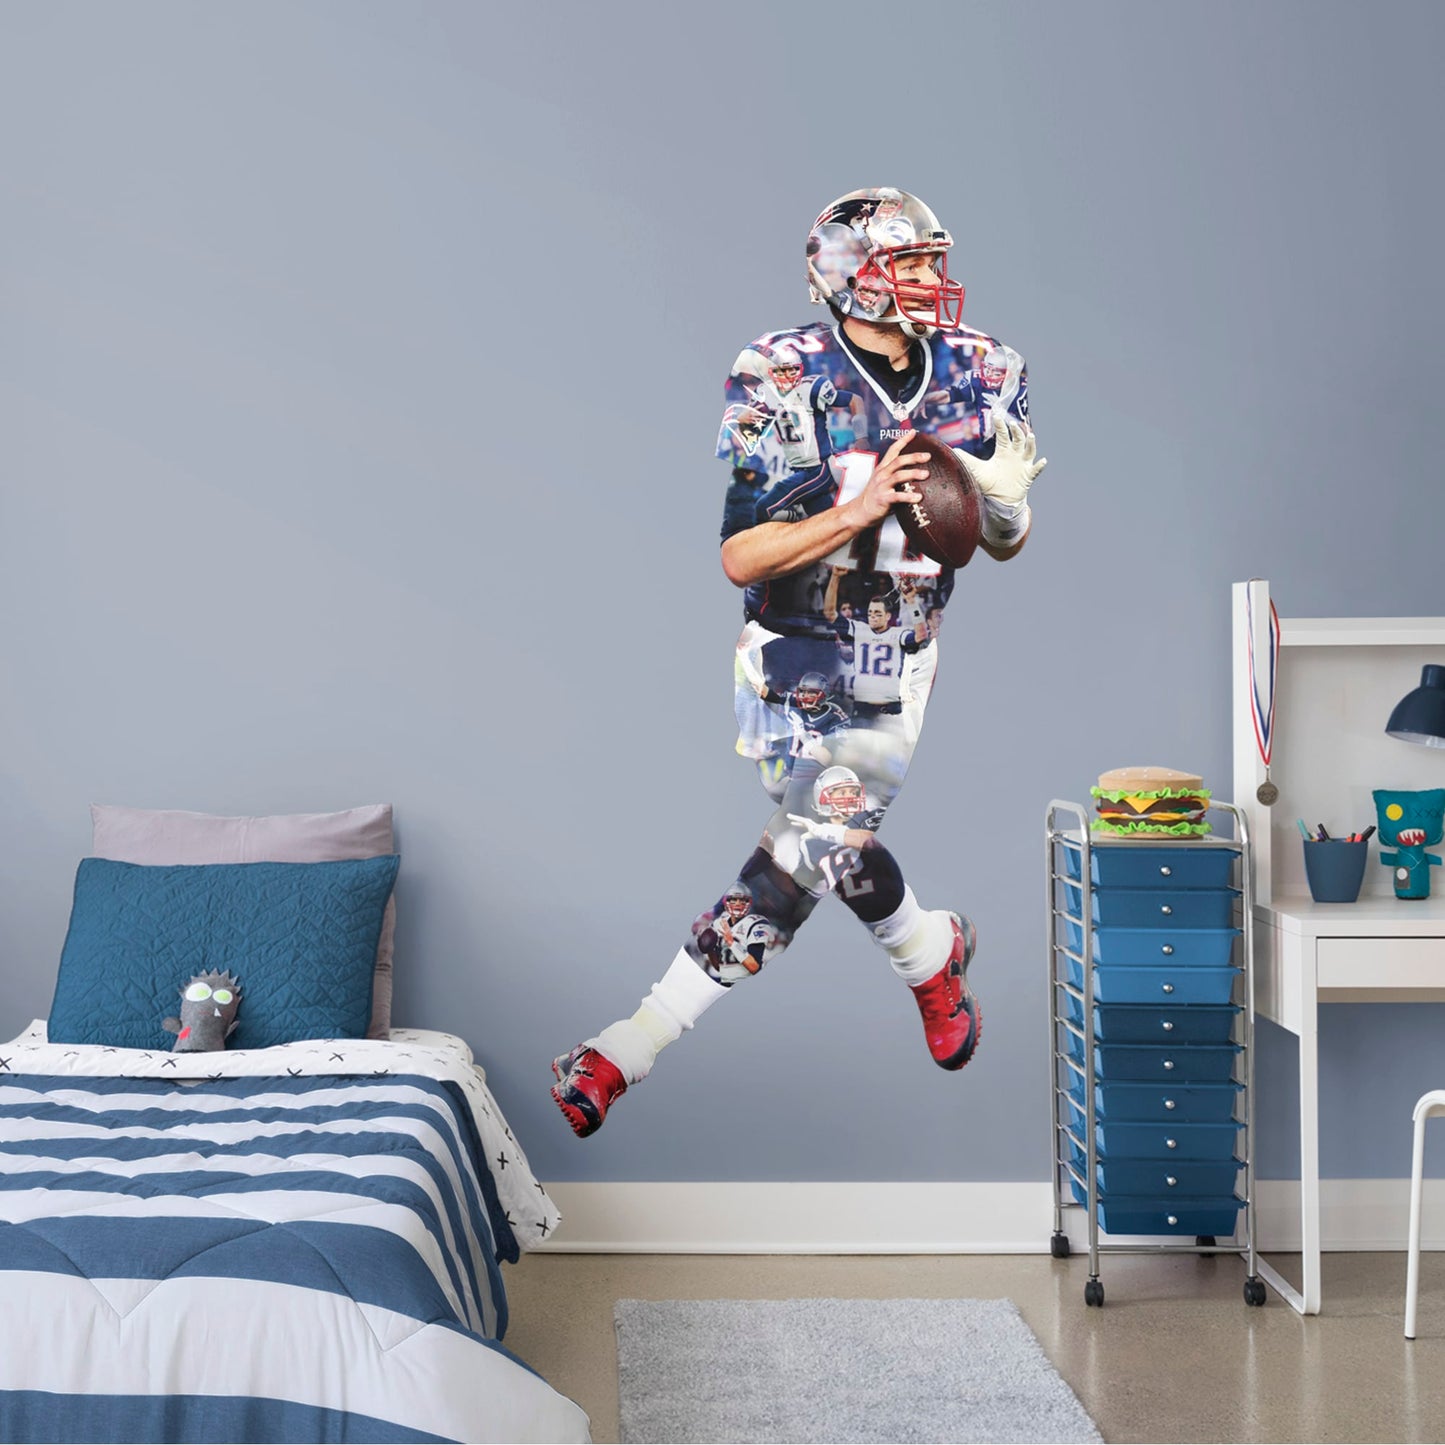 New England Patriots: Tom Brady Player Mural        - Officially Licensed NFL Removable Wall   Adhesive Decal